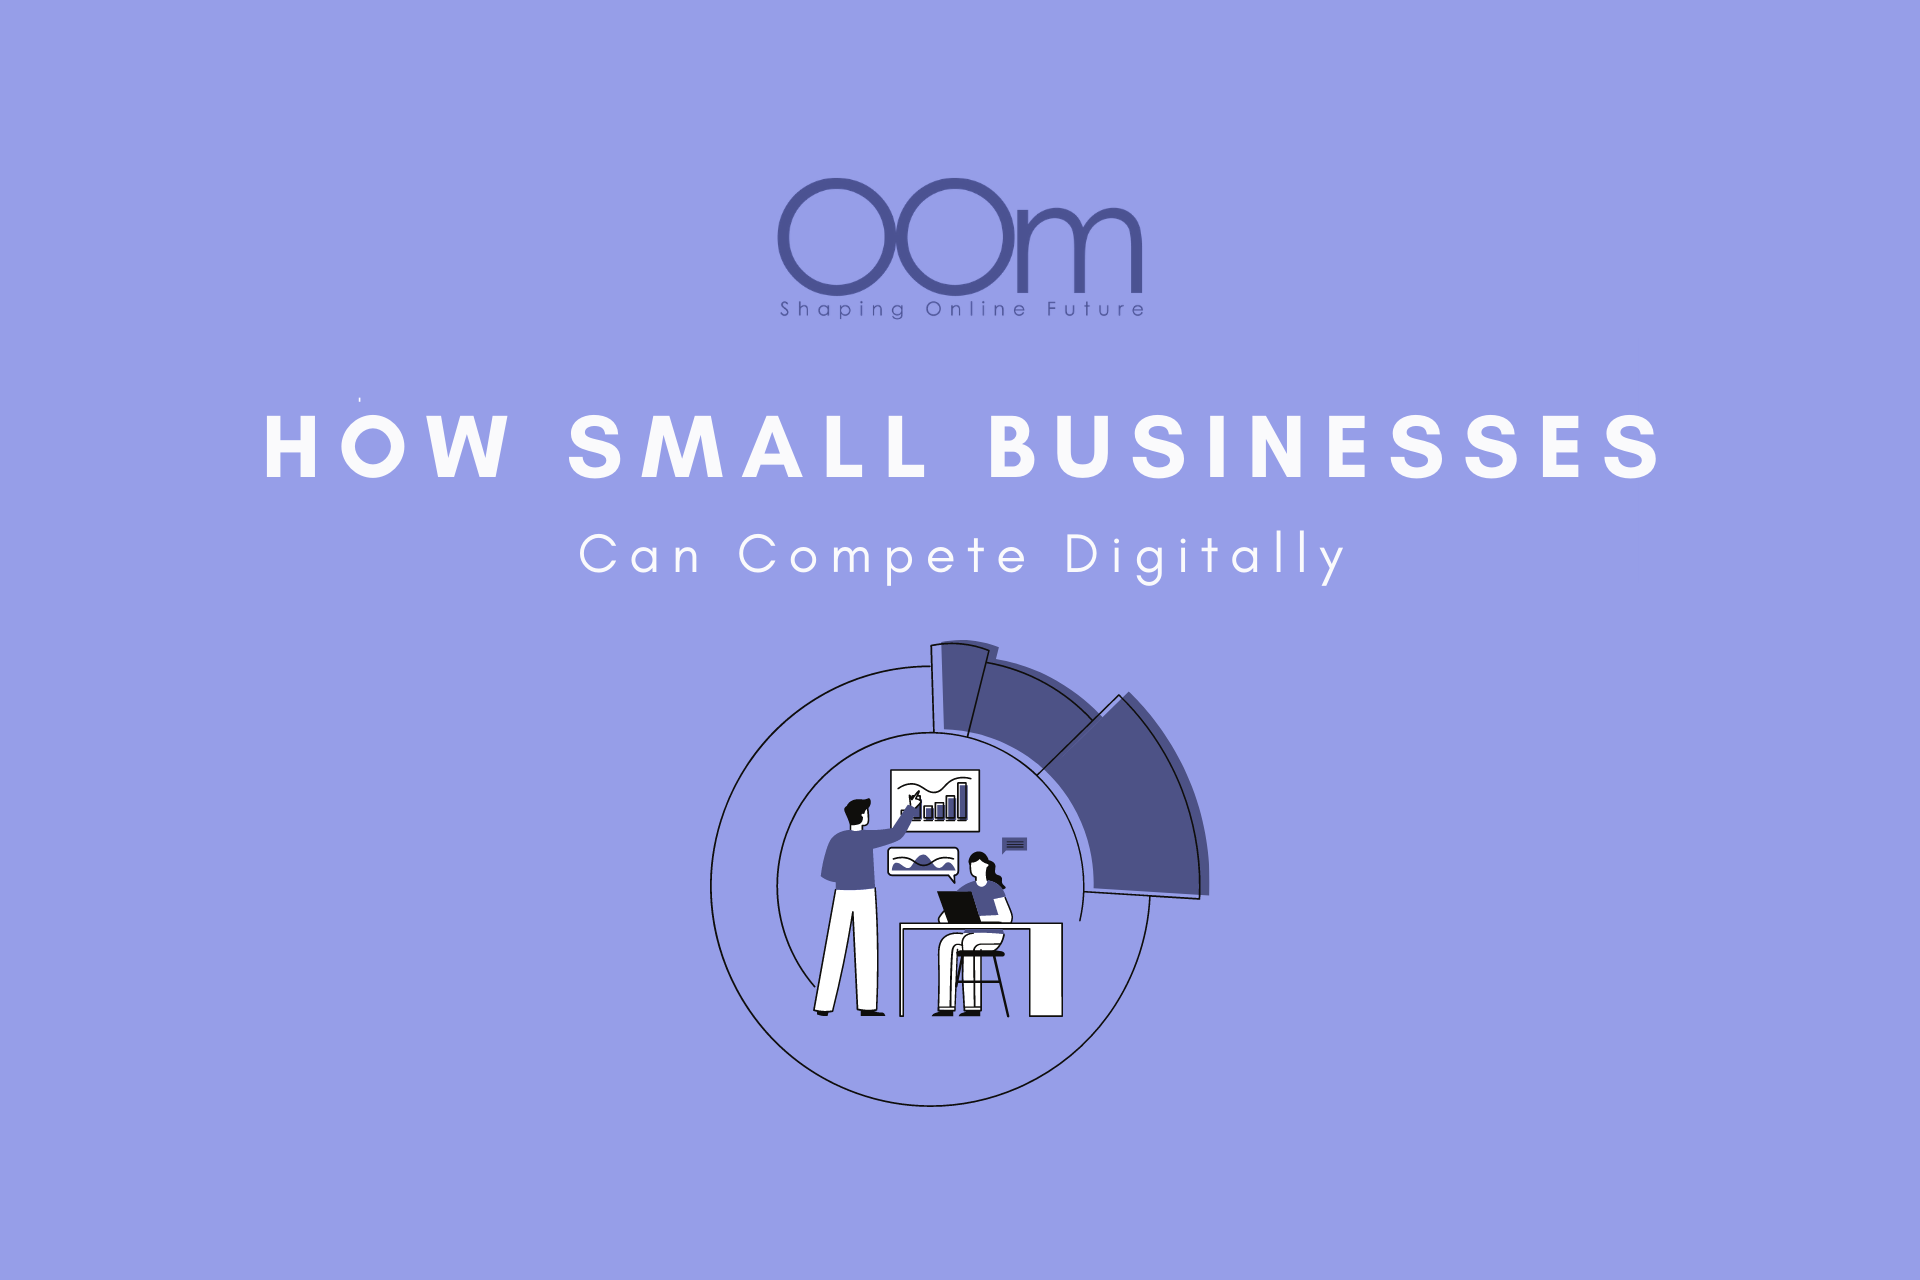 How Small Businesses Can Complete Digitally